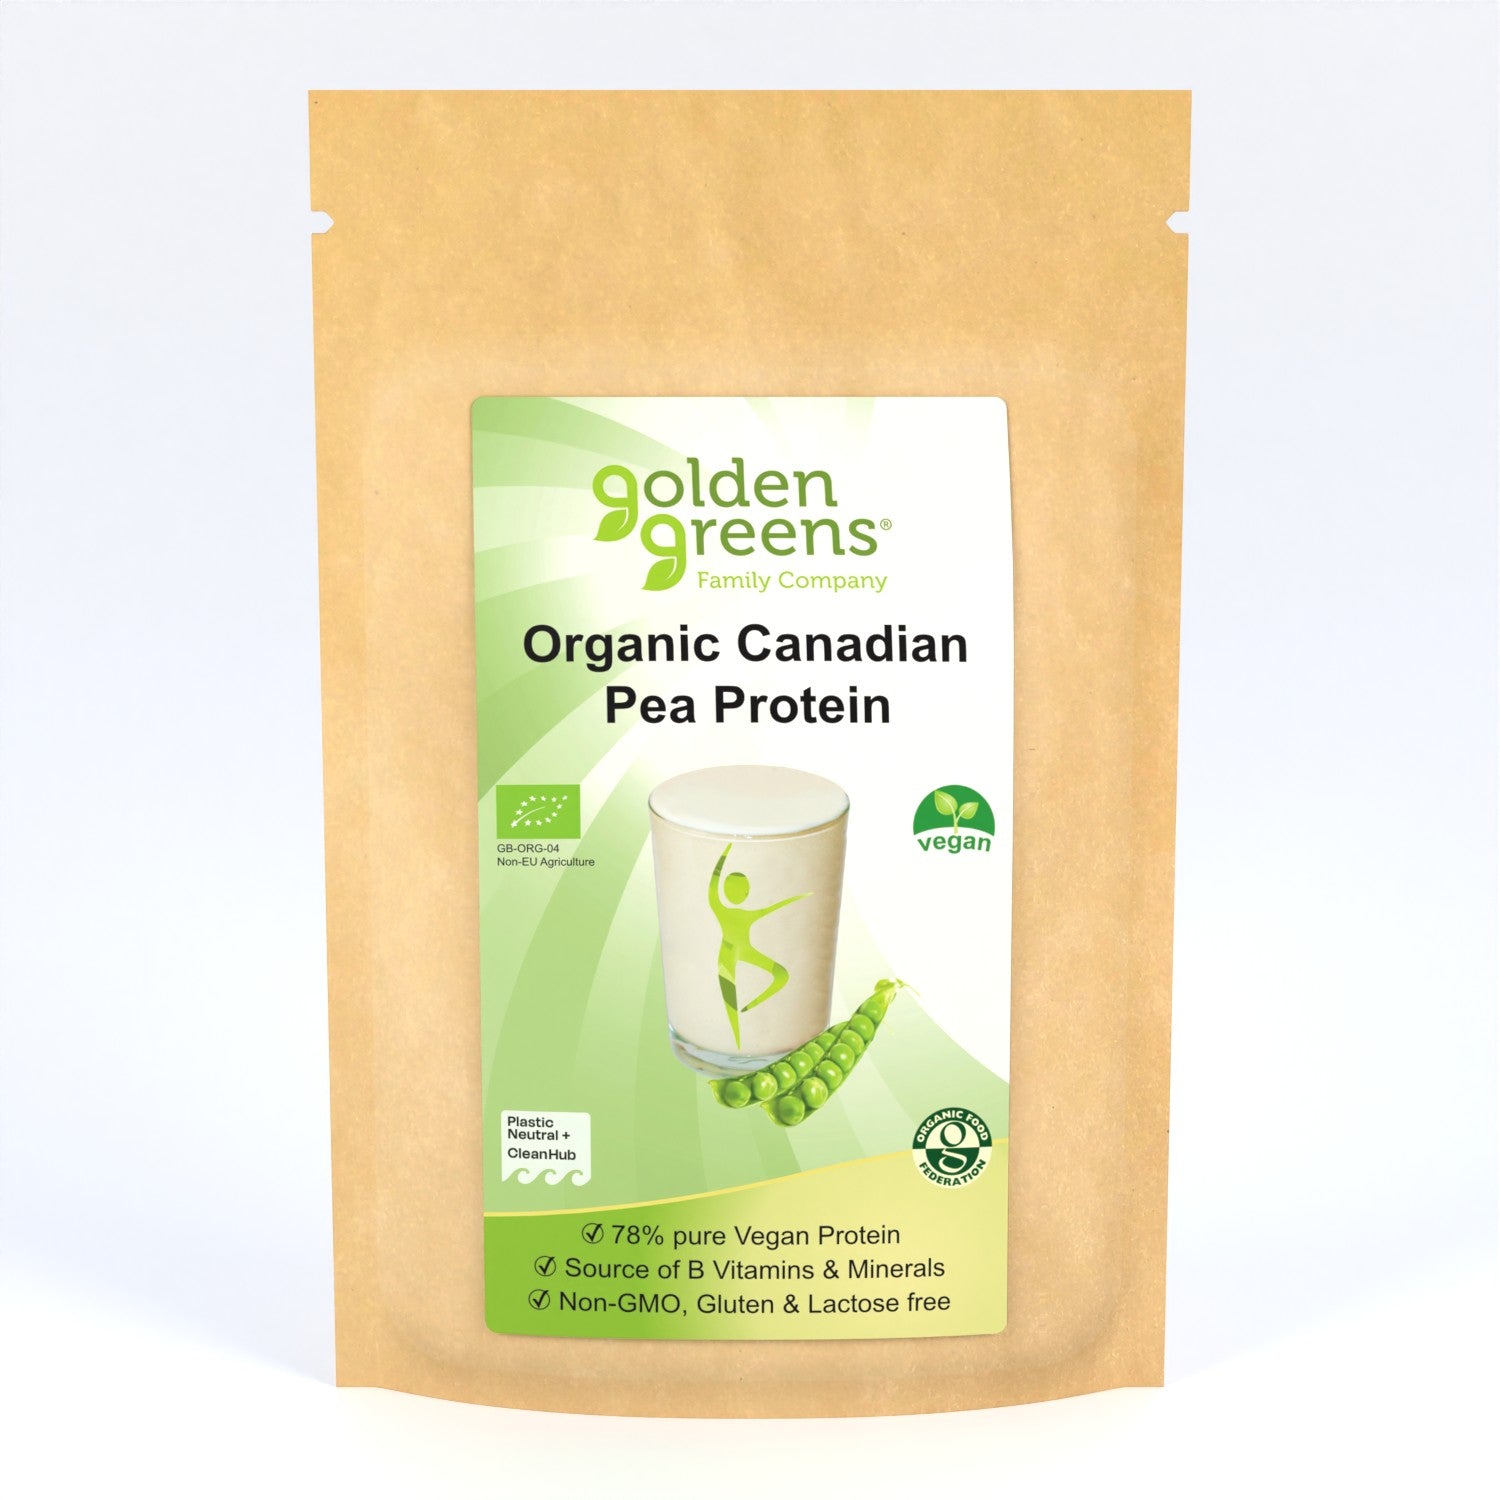 View Organic Canadian Pea Protein information